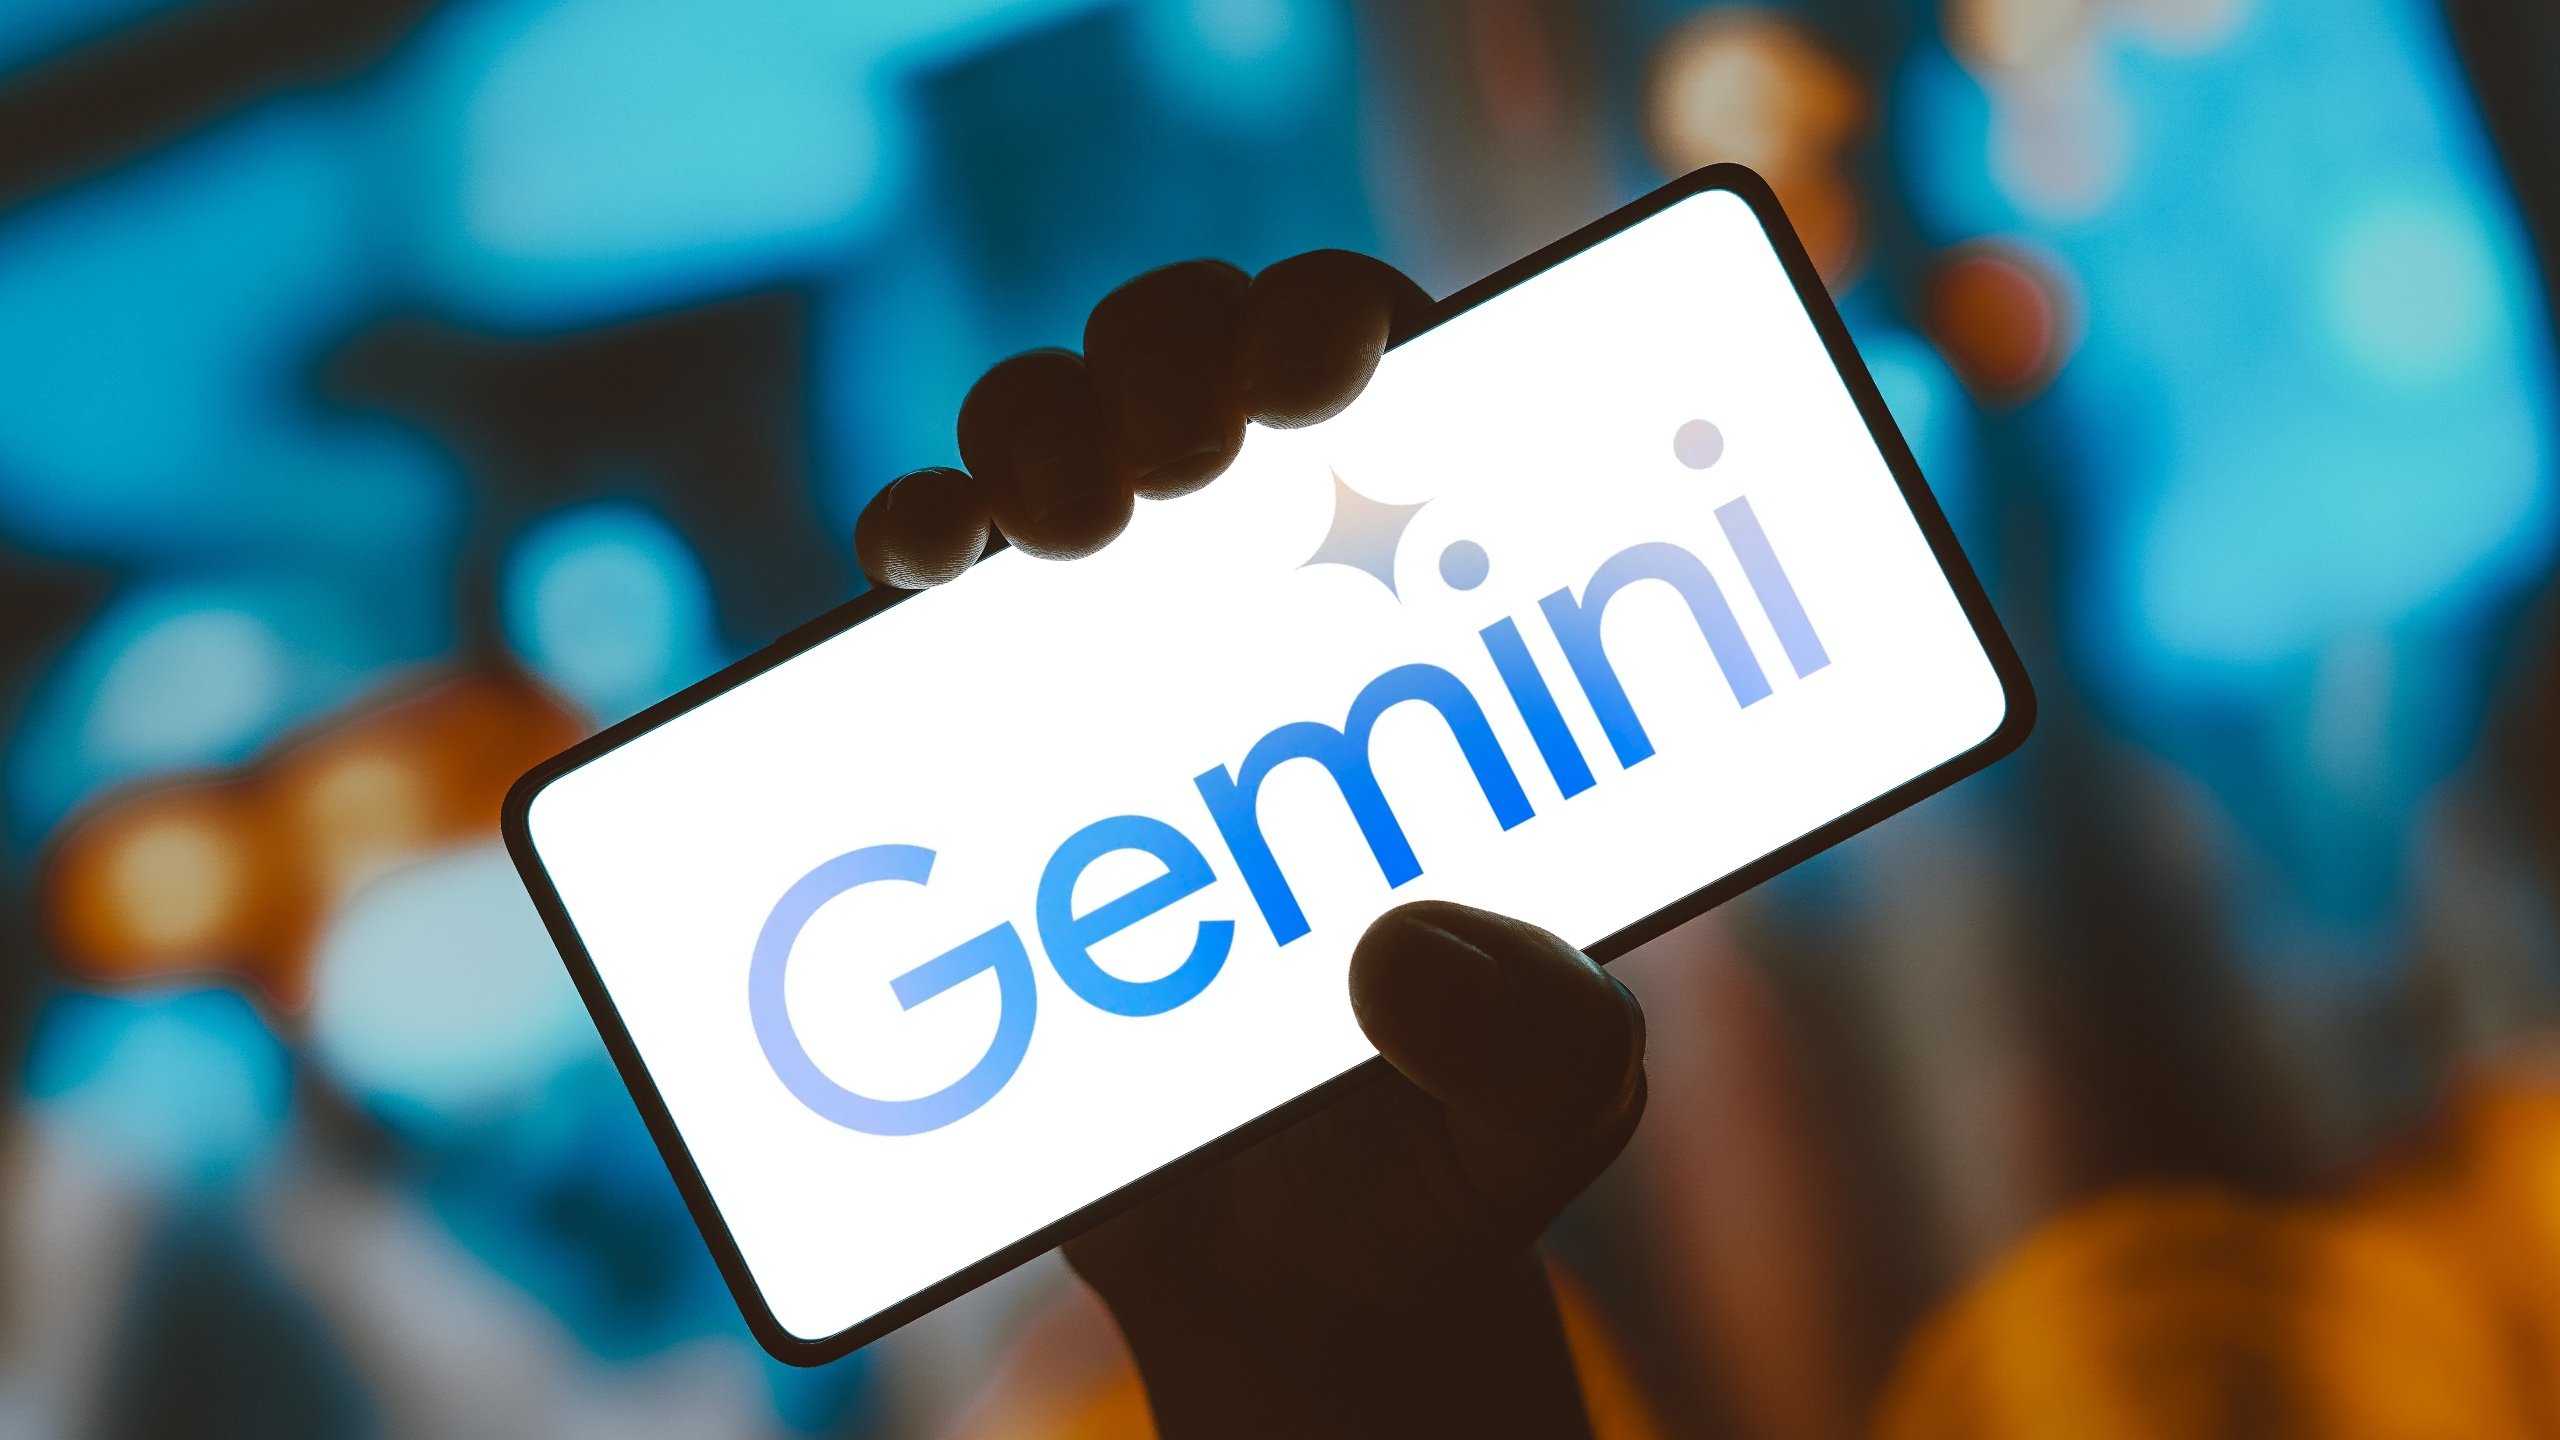 Google Limits Gemini AI on Election Queries Ahead of Vote